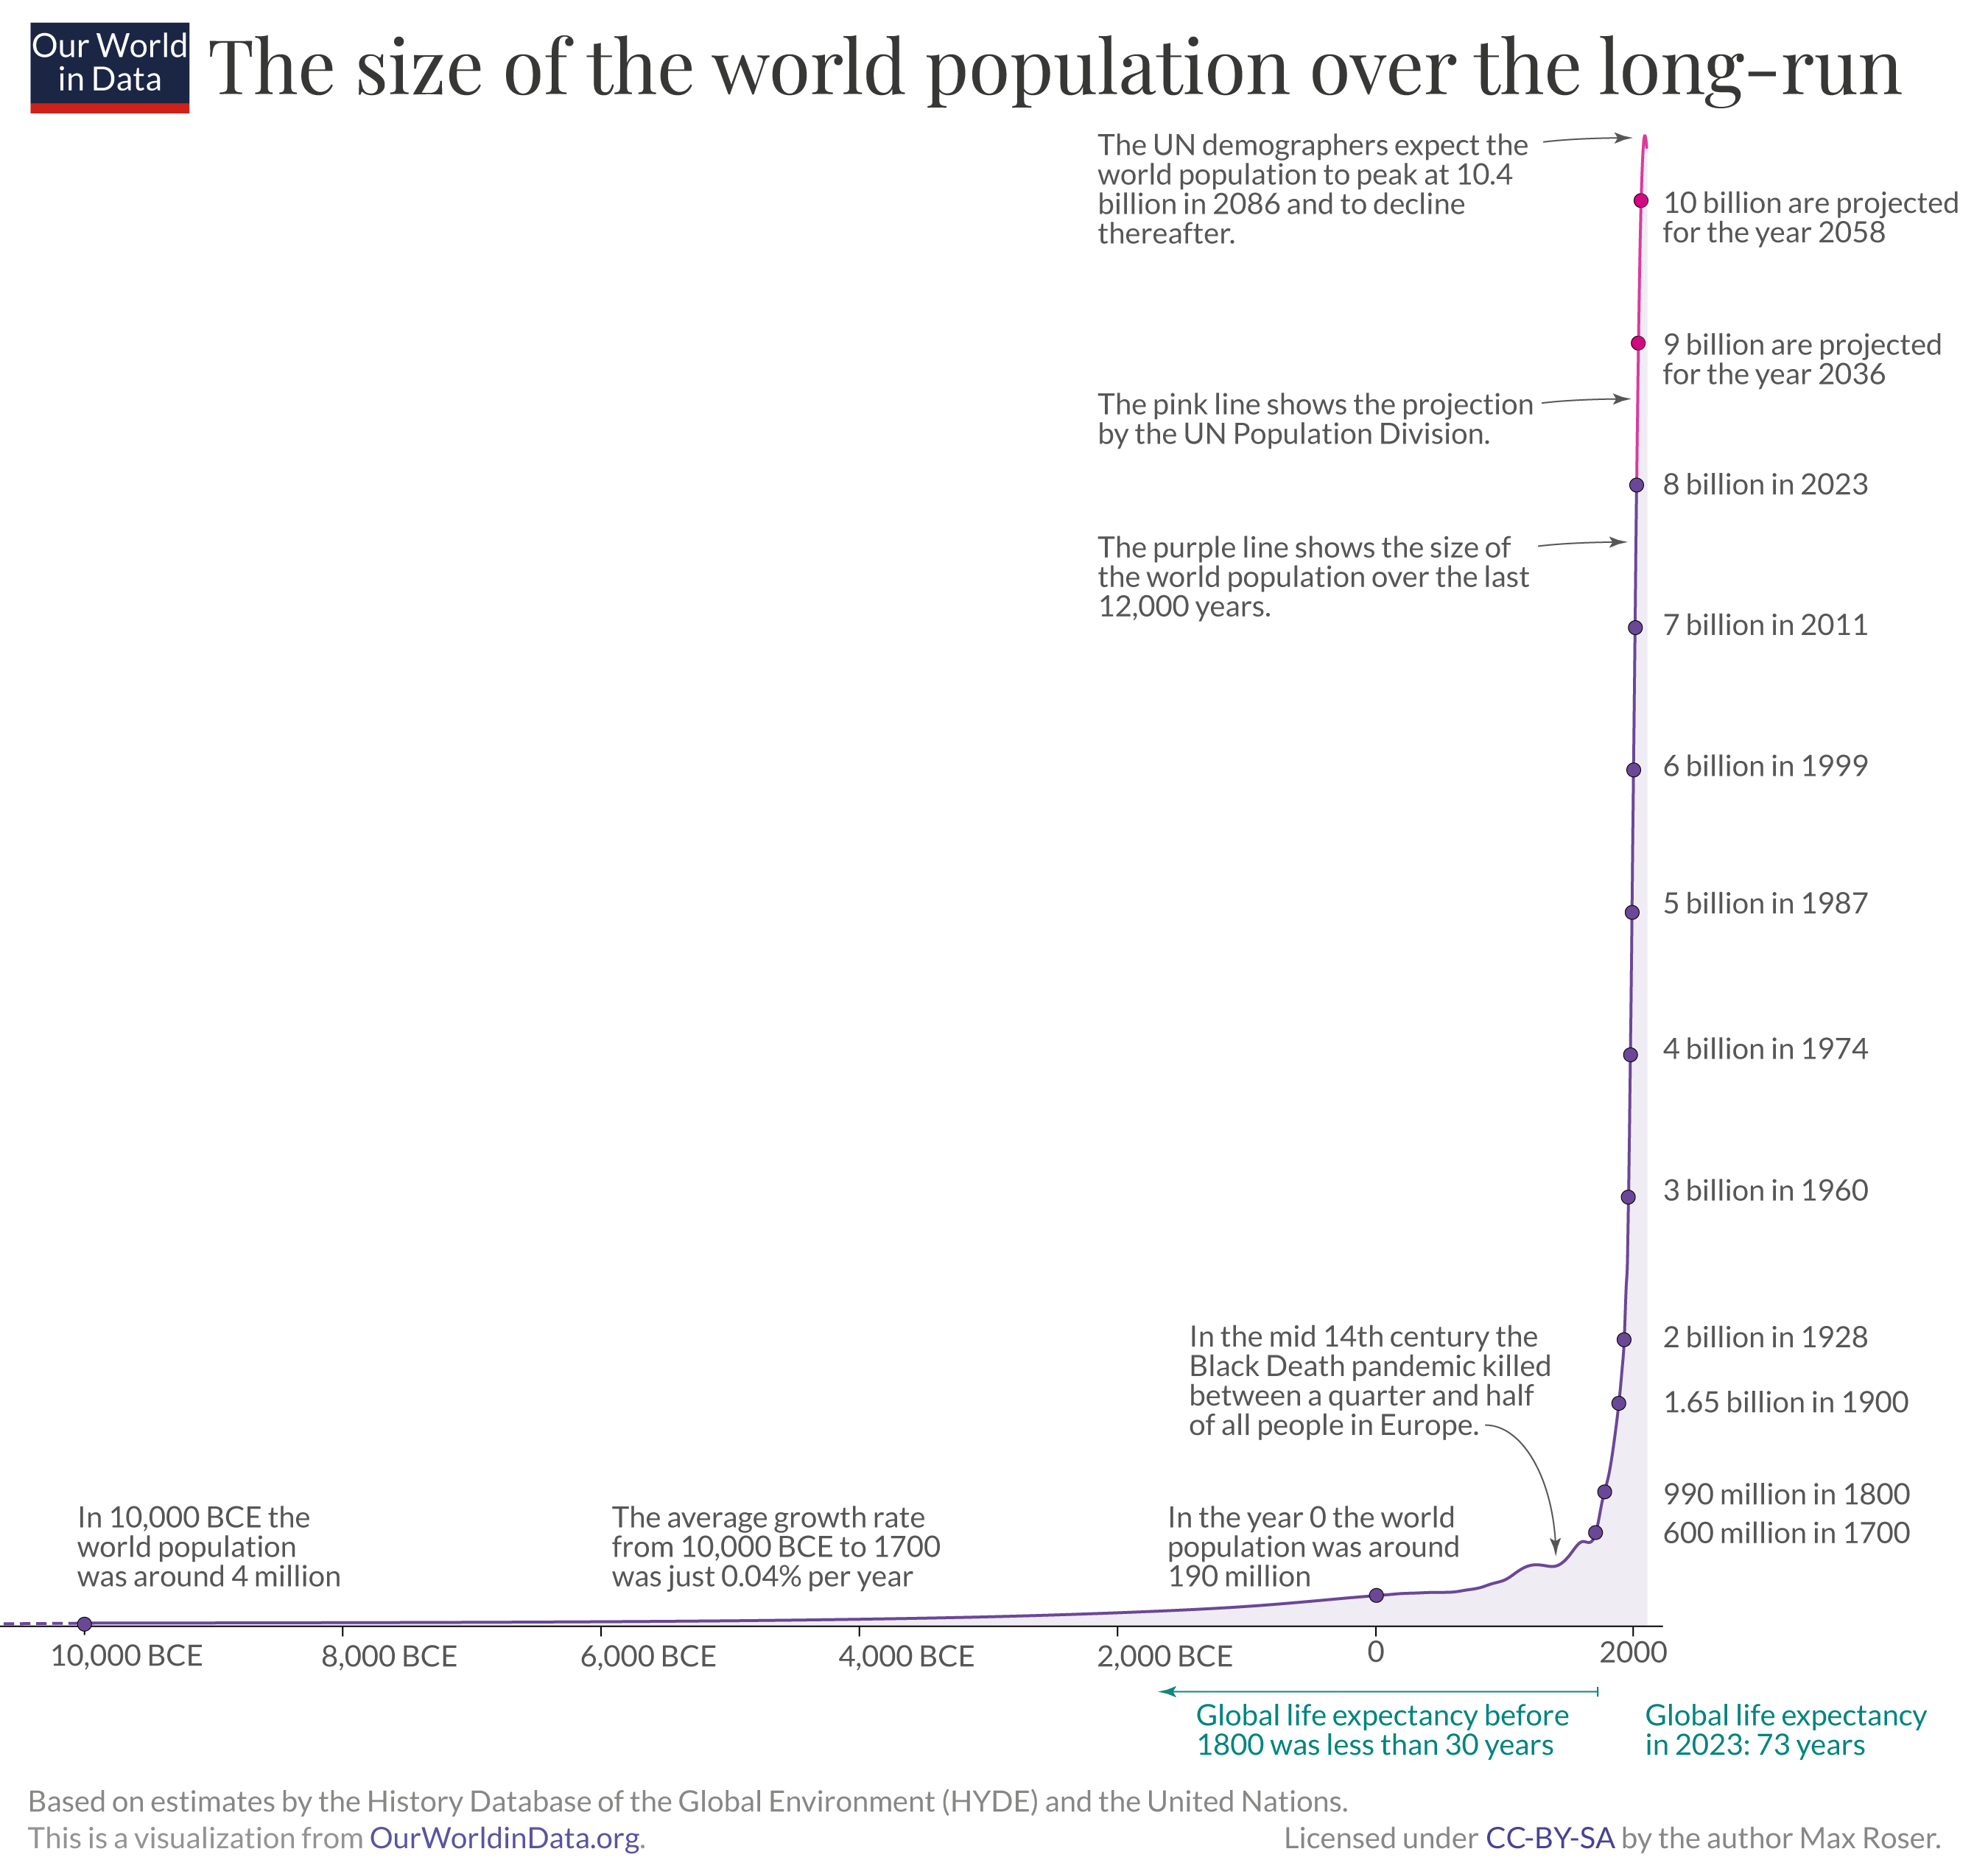 A line chart that shows the world population since 10,000BC. The line is mostly flat until the last few centuries when the population increased rapidly.